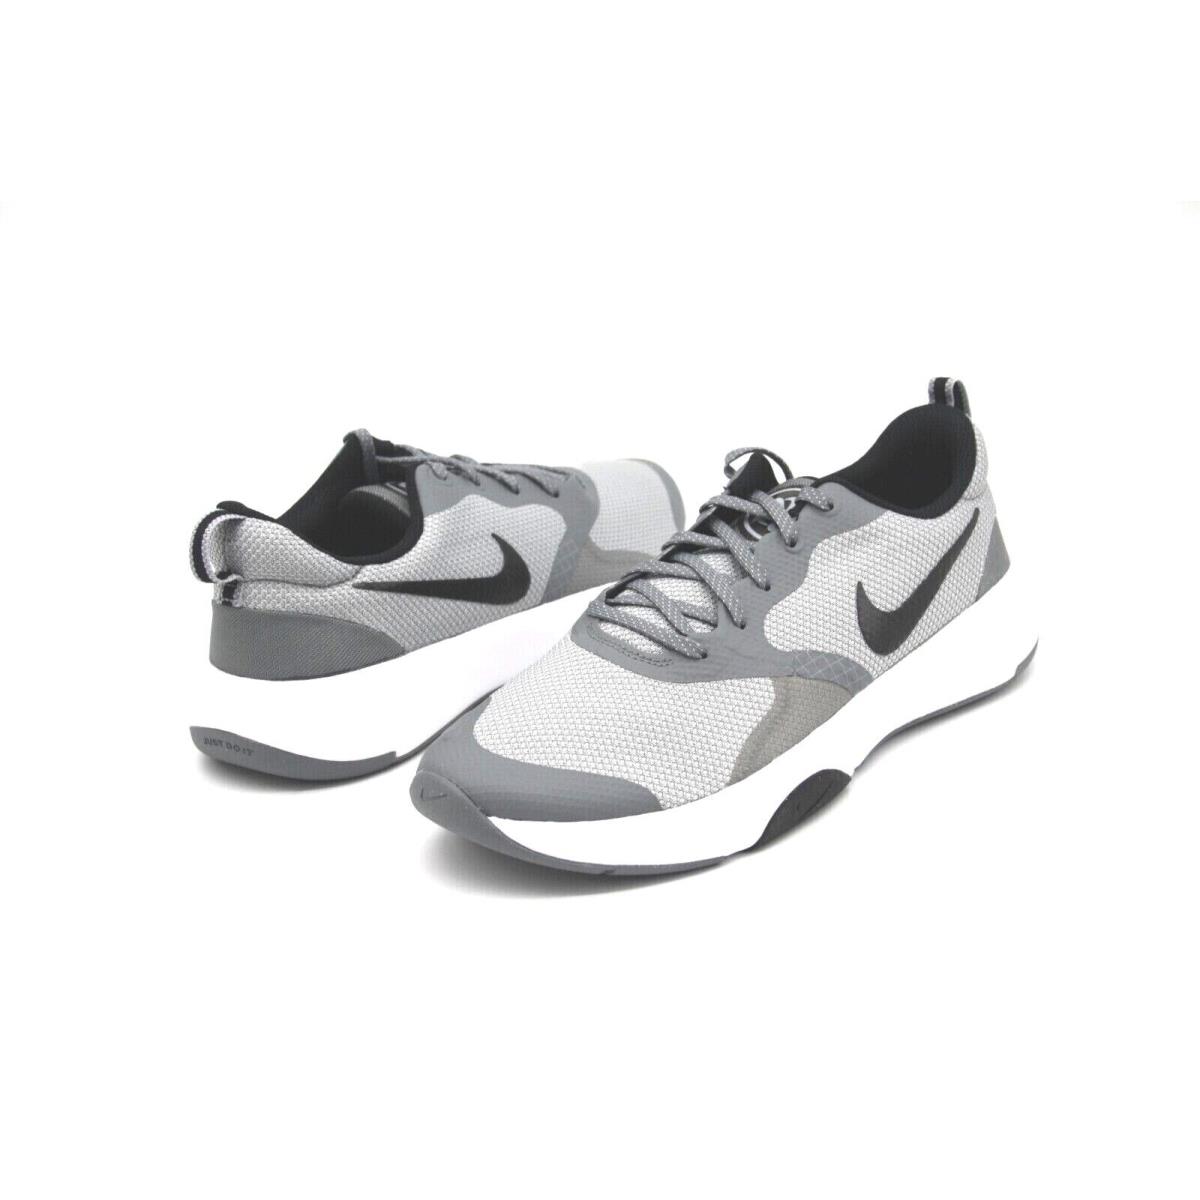 Nike shoes City Rep - Wolf Grey/Cool Grey/White/Black 3